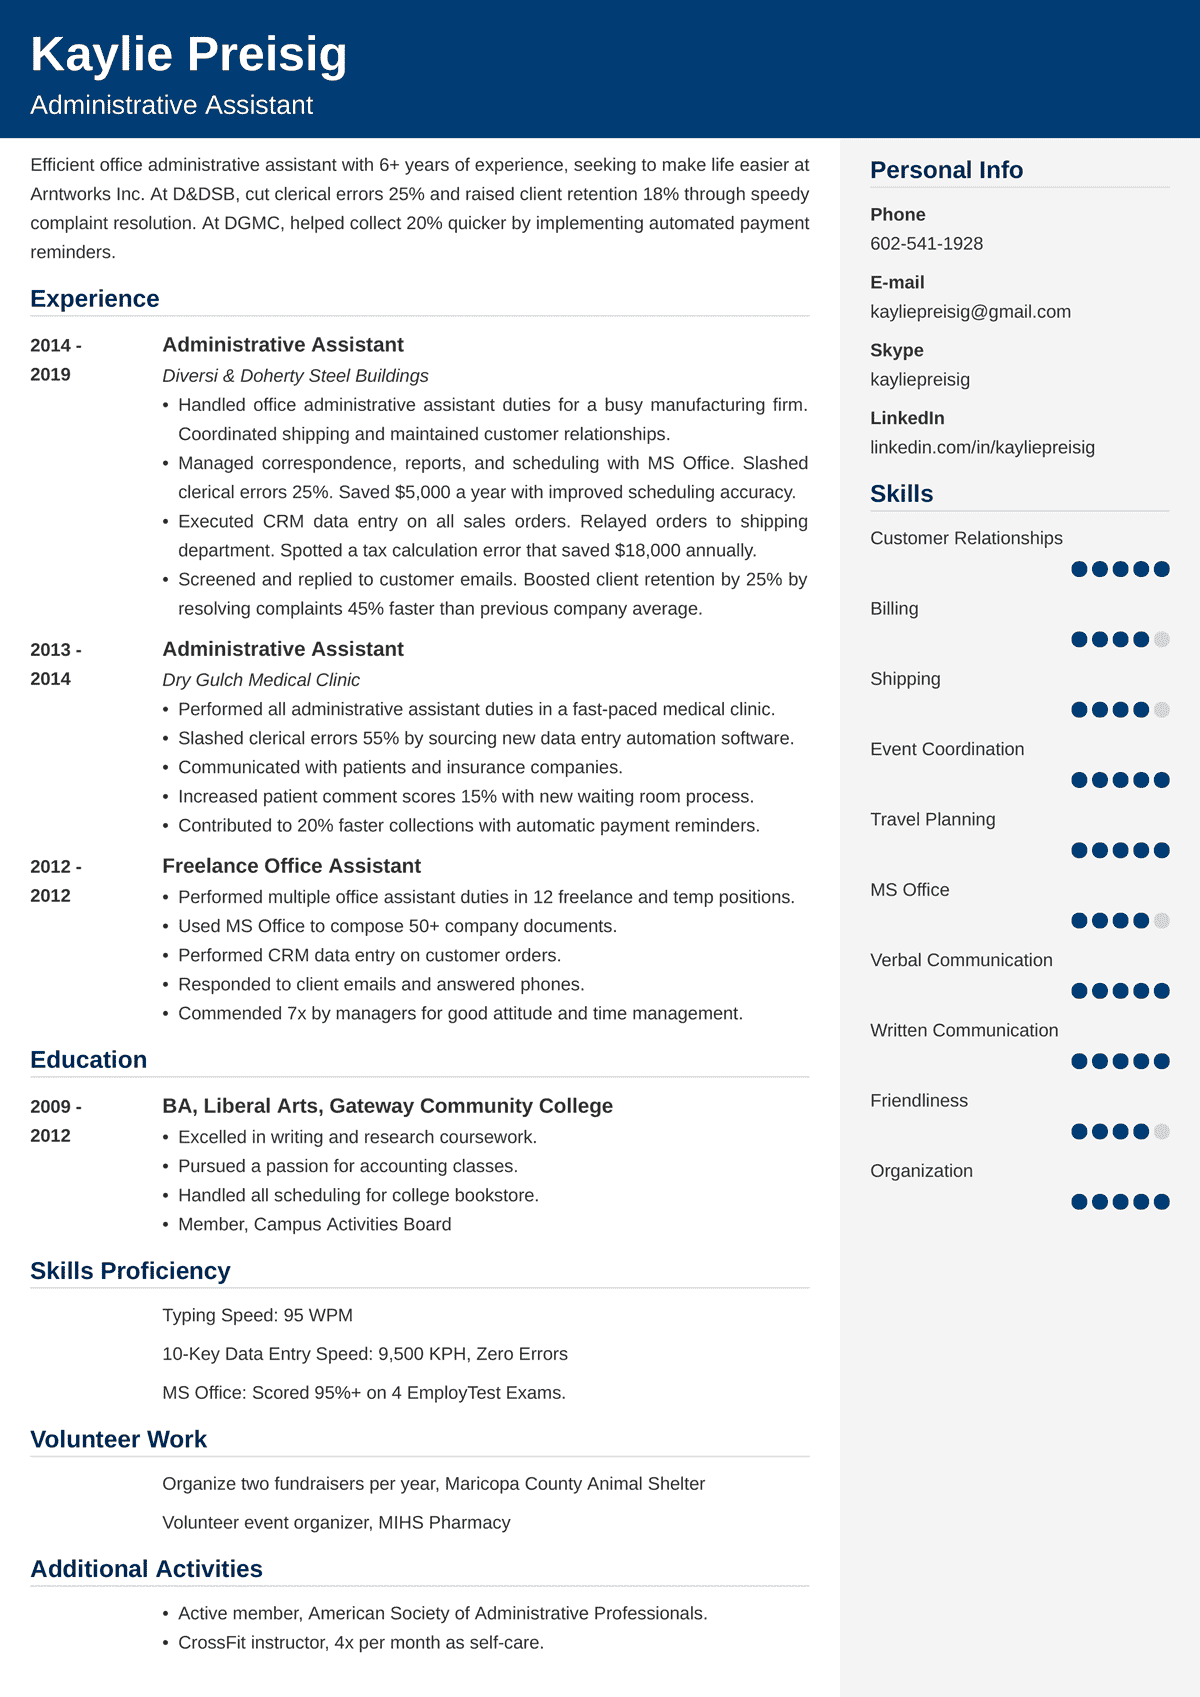 resume profile samples for administrative assistant